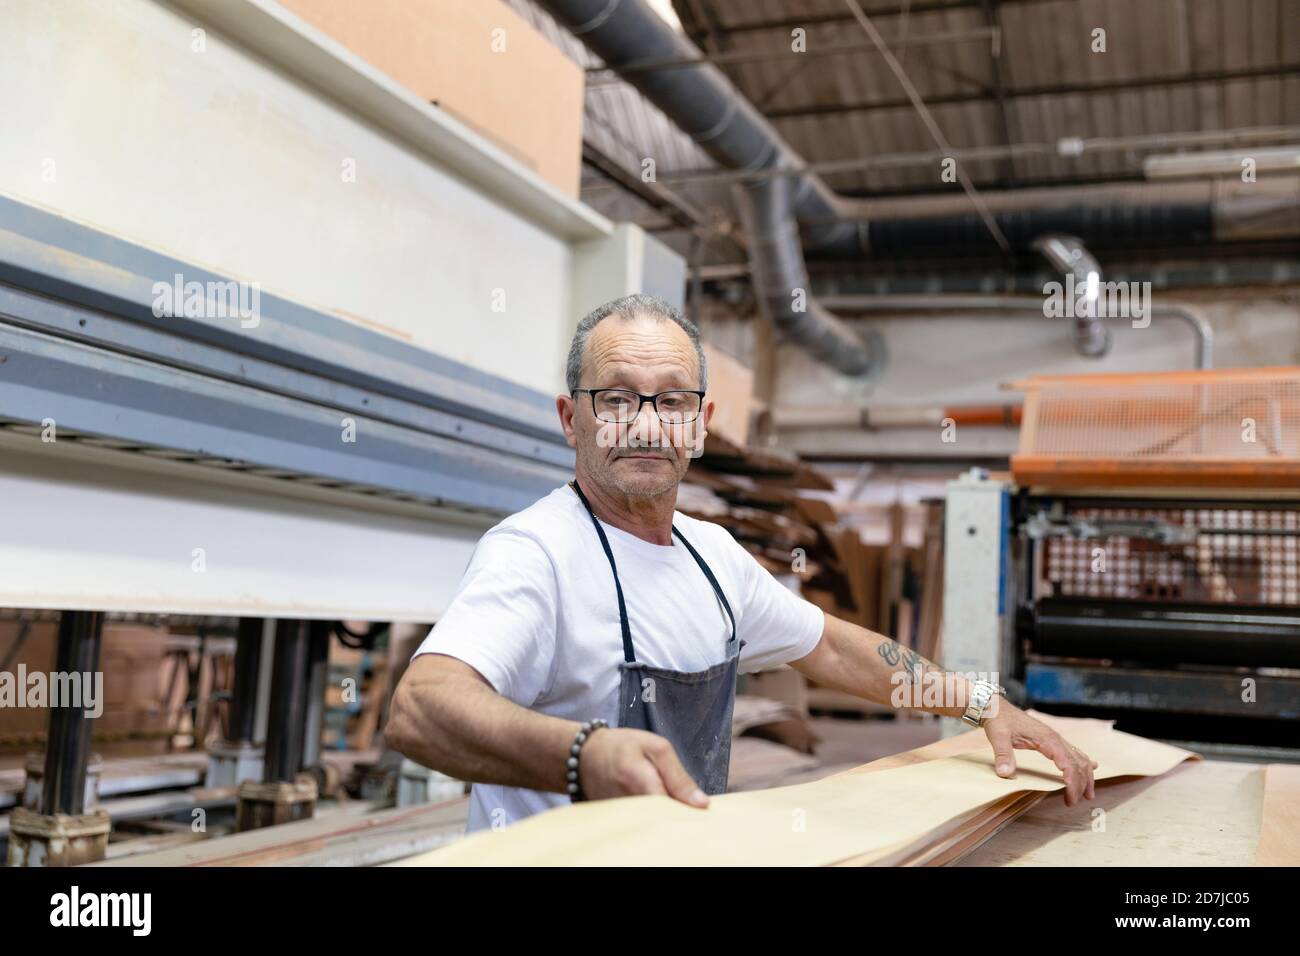 Senior men collecting laminated wood while standing at factory Stock Photo